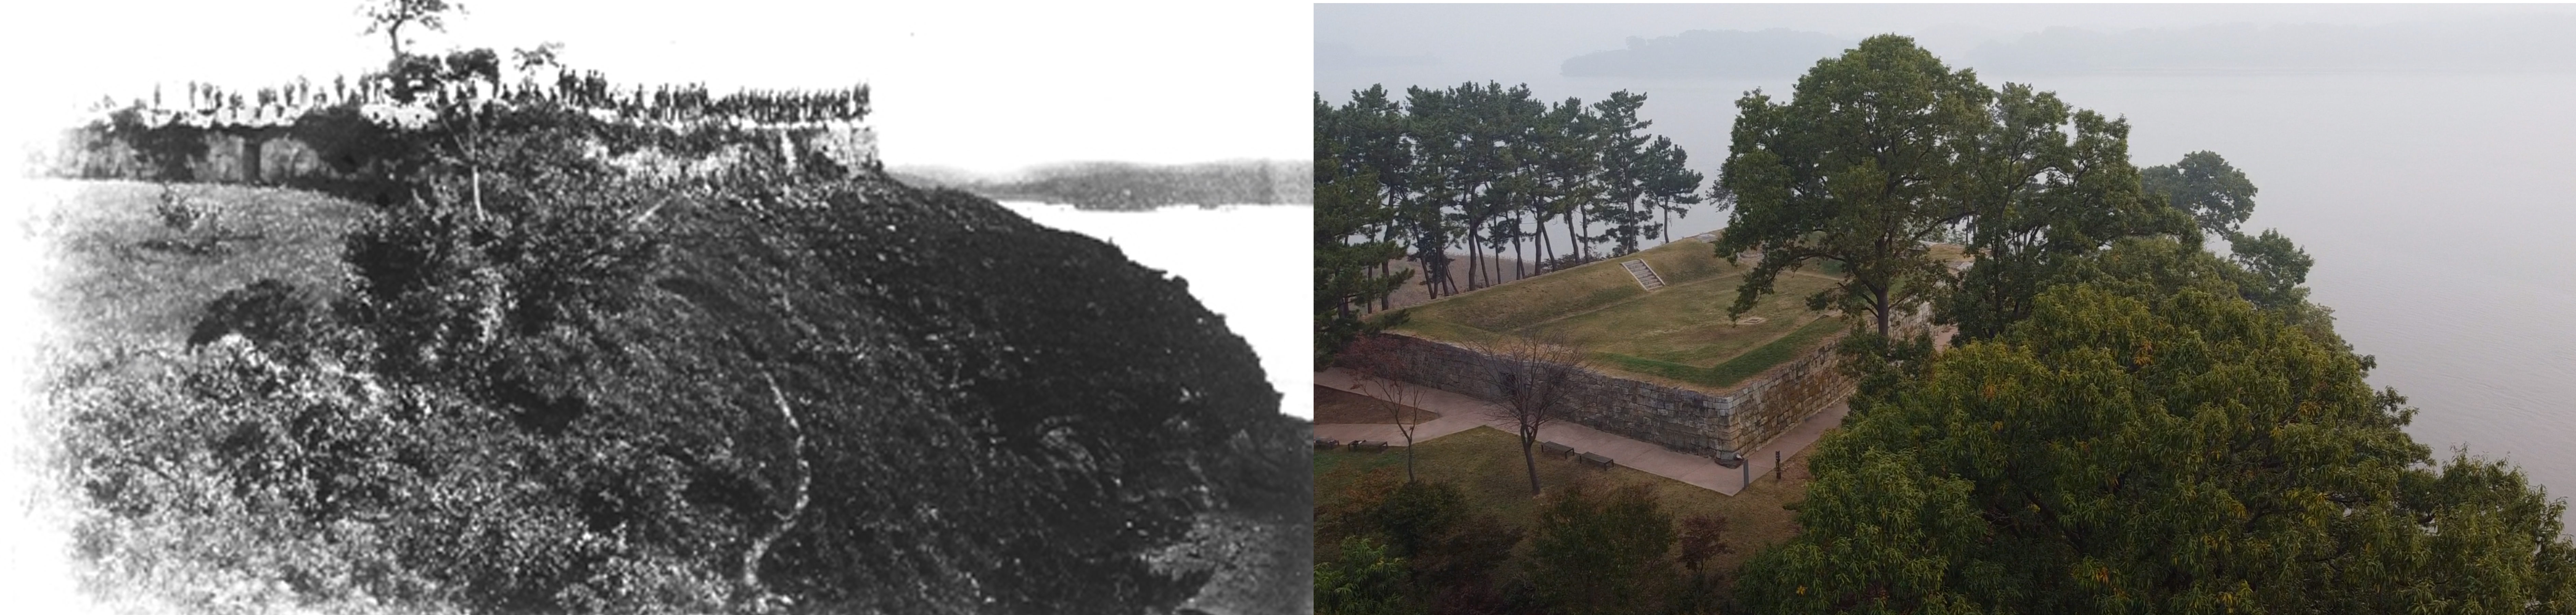 Felice Beato photo on the left of the US Marines on top of the Deokjin Fort in 1871/the same spot in 2021